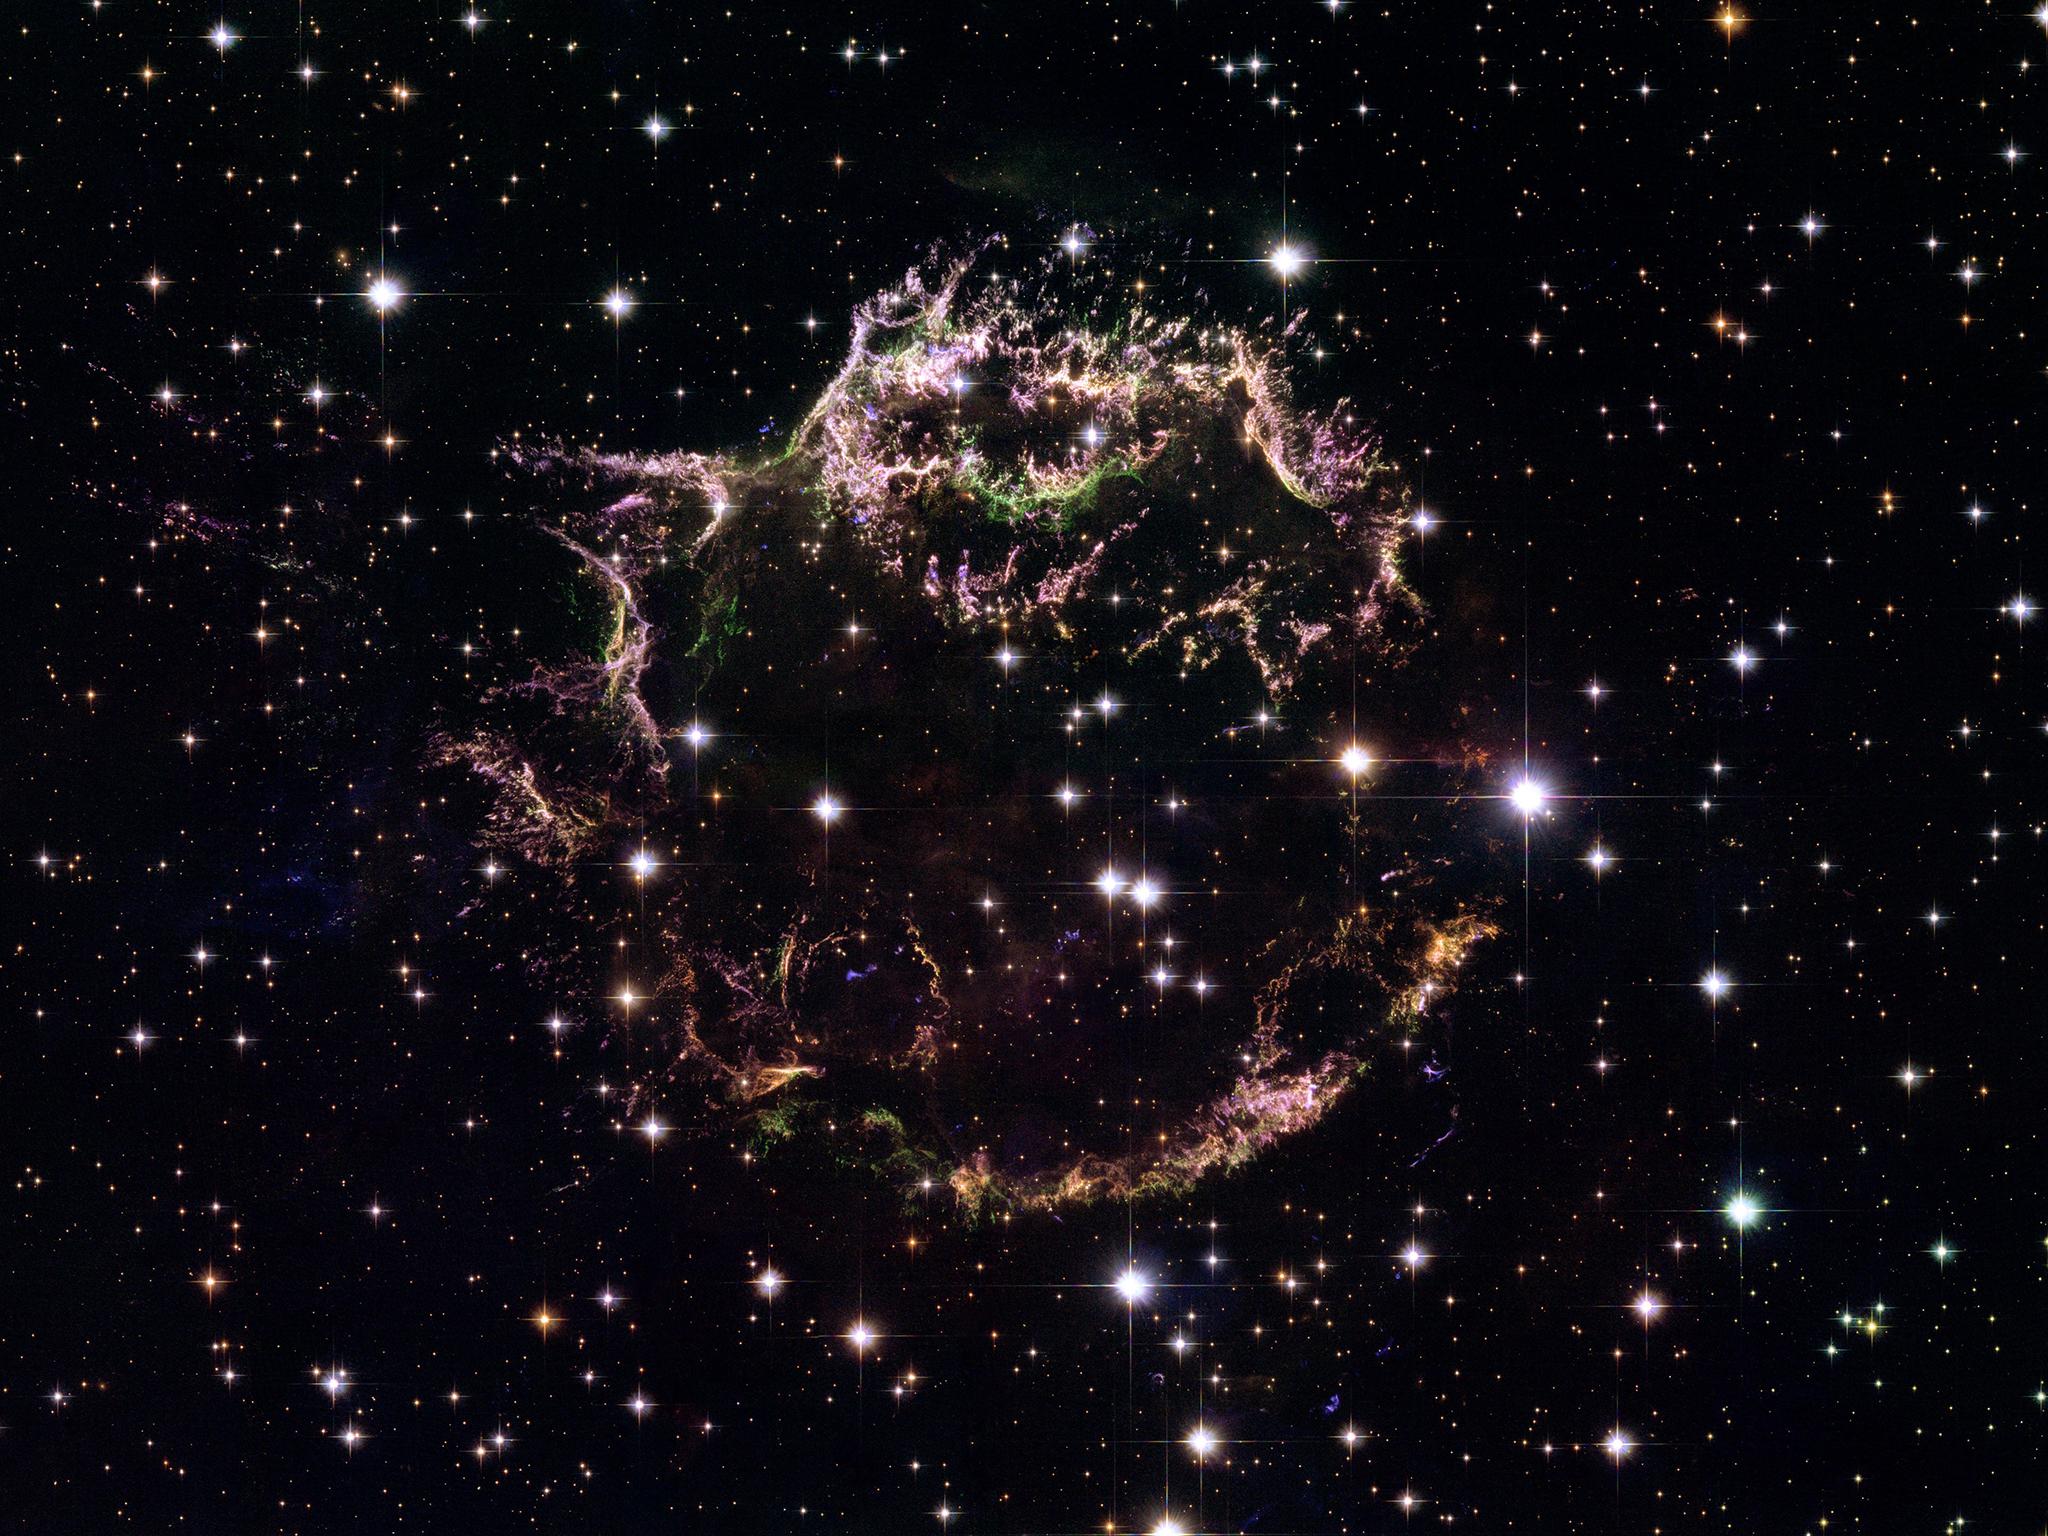 The Hubble Space Telescope shows the tattered remains of a supernova explosion known as Cassiopeia A. It is the youngest known remnant from a supernova explosion in the Milky Way